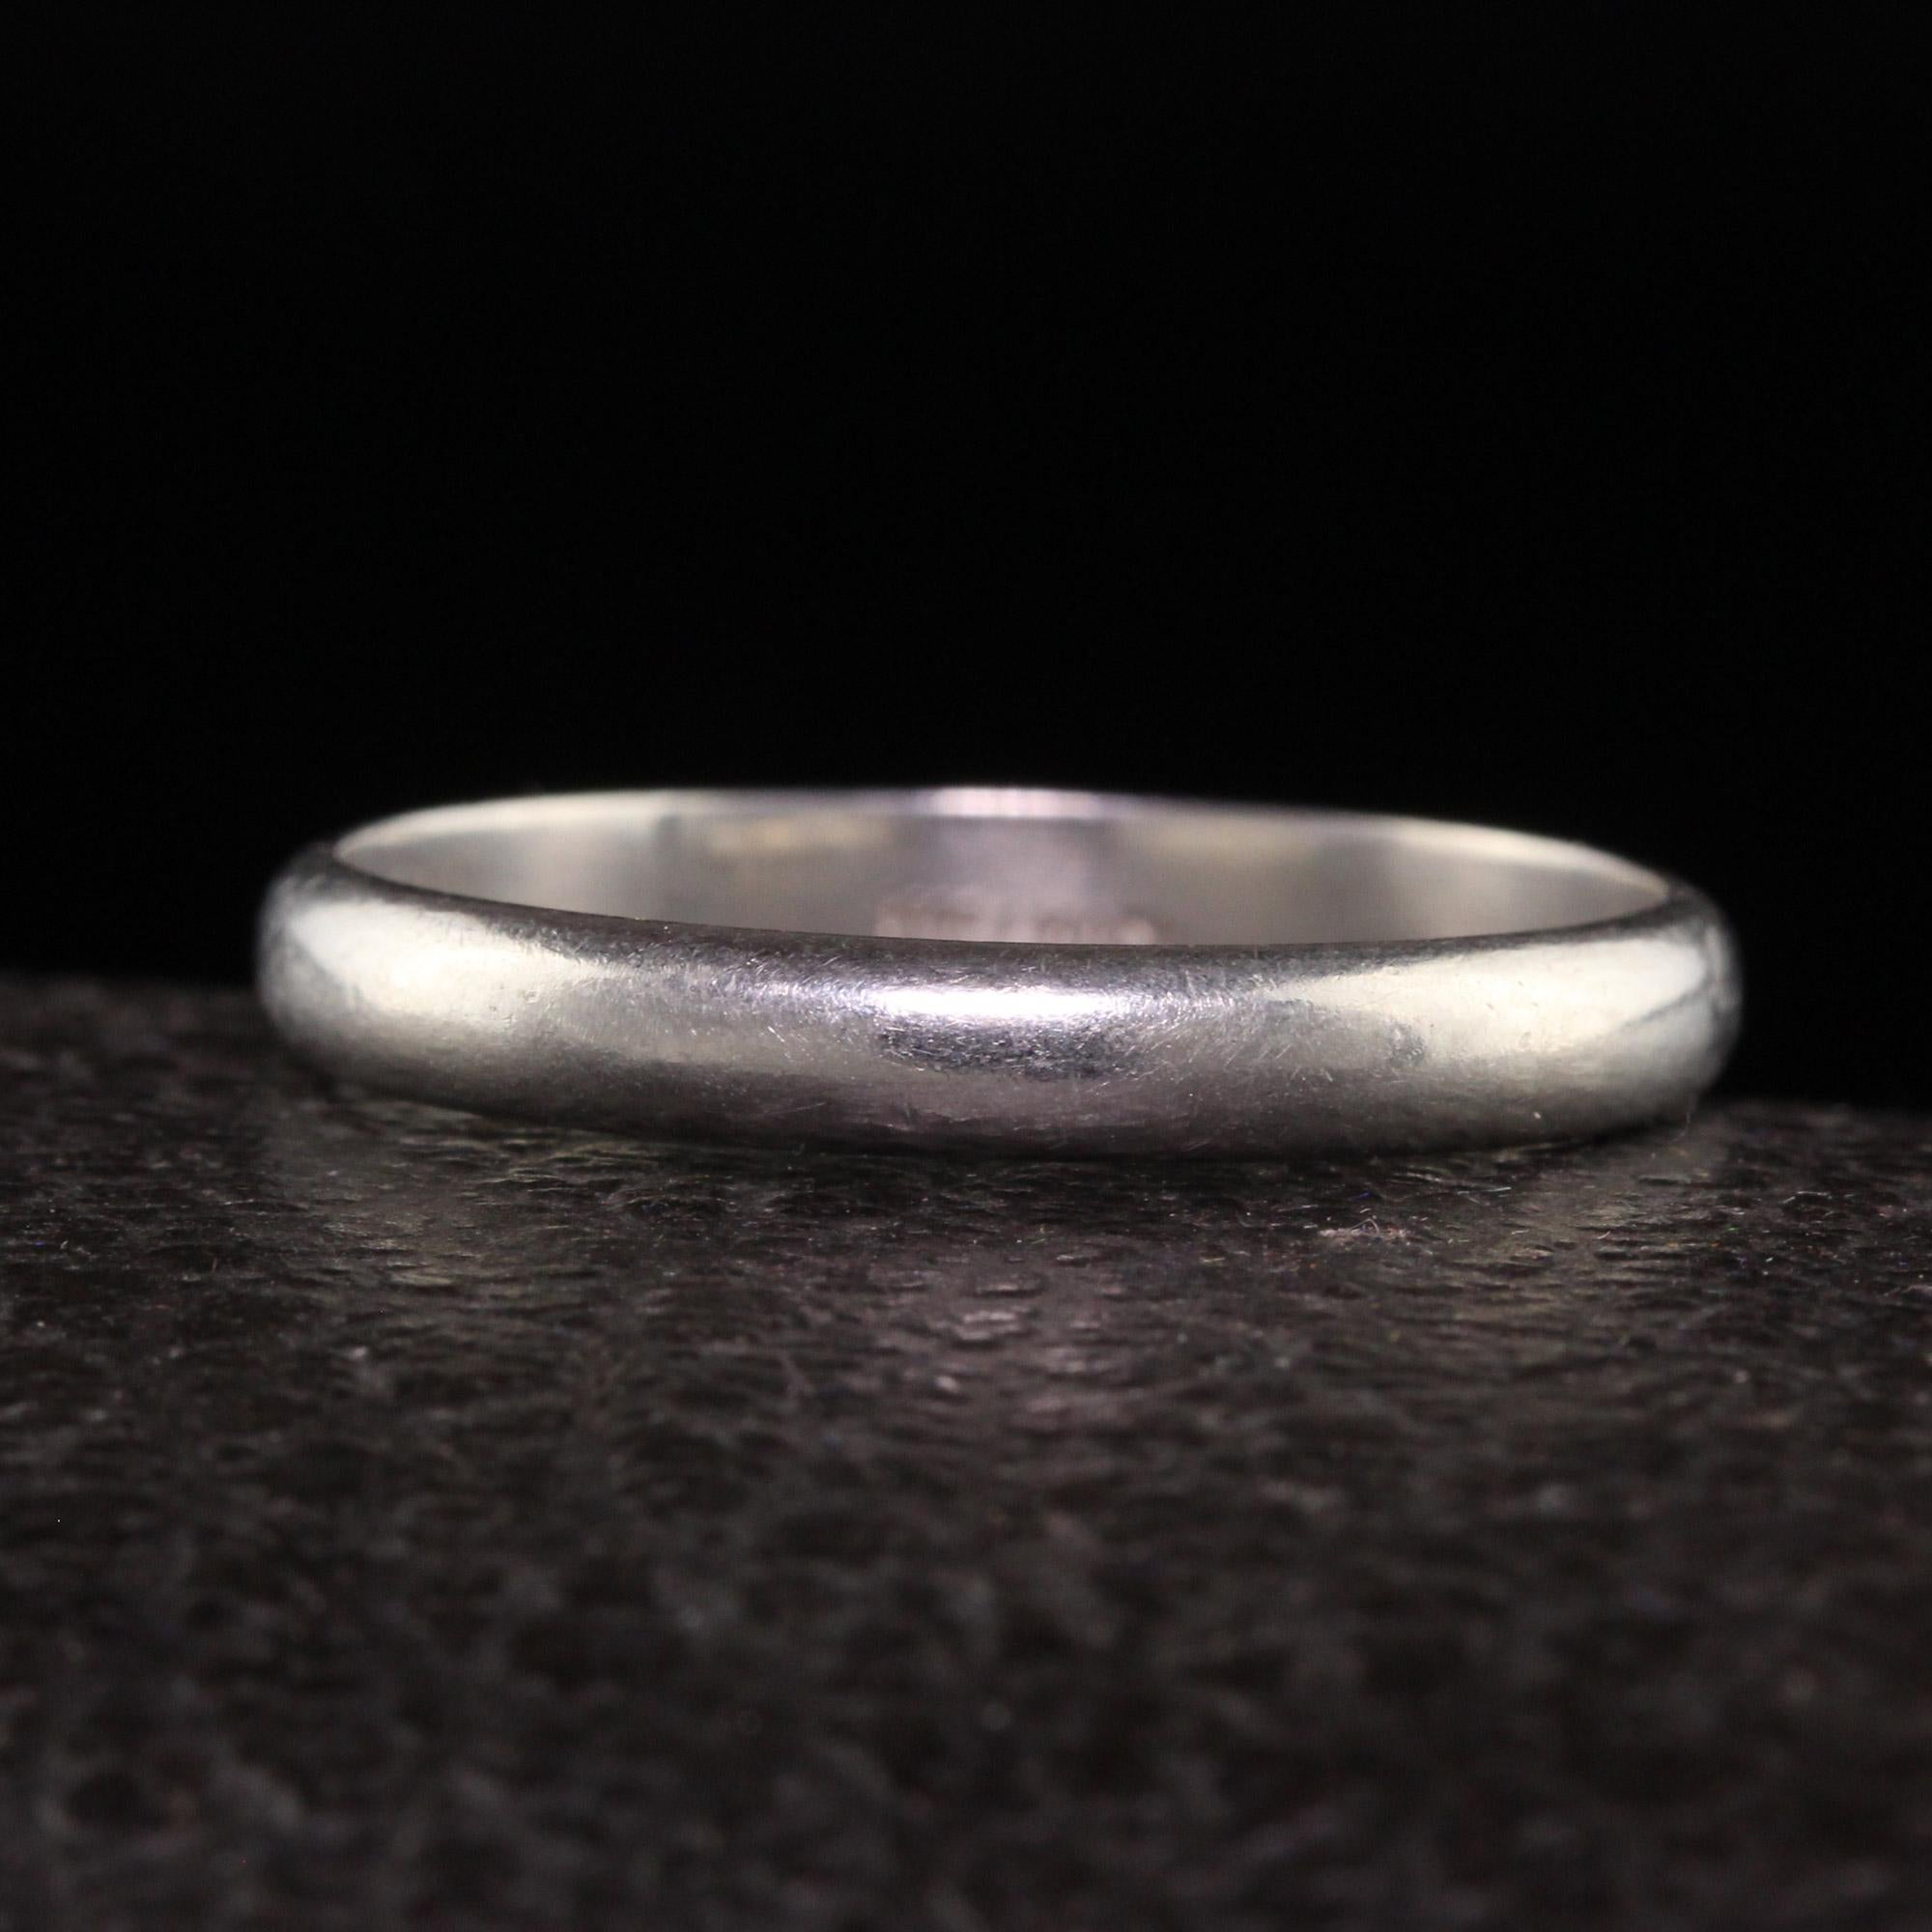 Beautiful Antique Art Deco Platinum Classic Plain Wedding Band - Size 10. This classic wedding band is crafted in platinum. The ring is in good condition and fits very comfortably on the finger.

Item #R1574

Metal: Platinum

Weight: 4.8